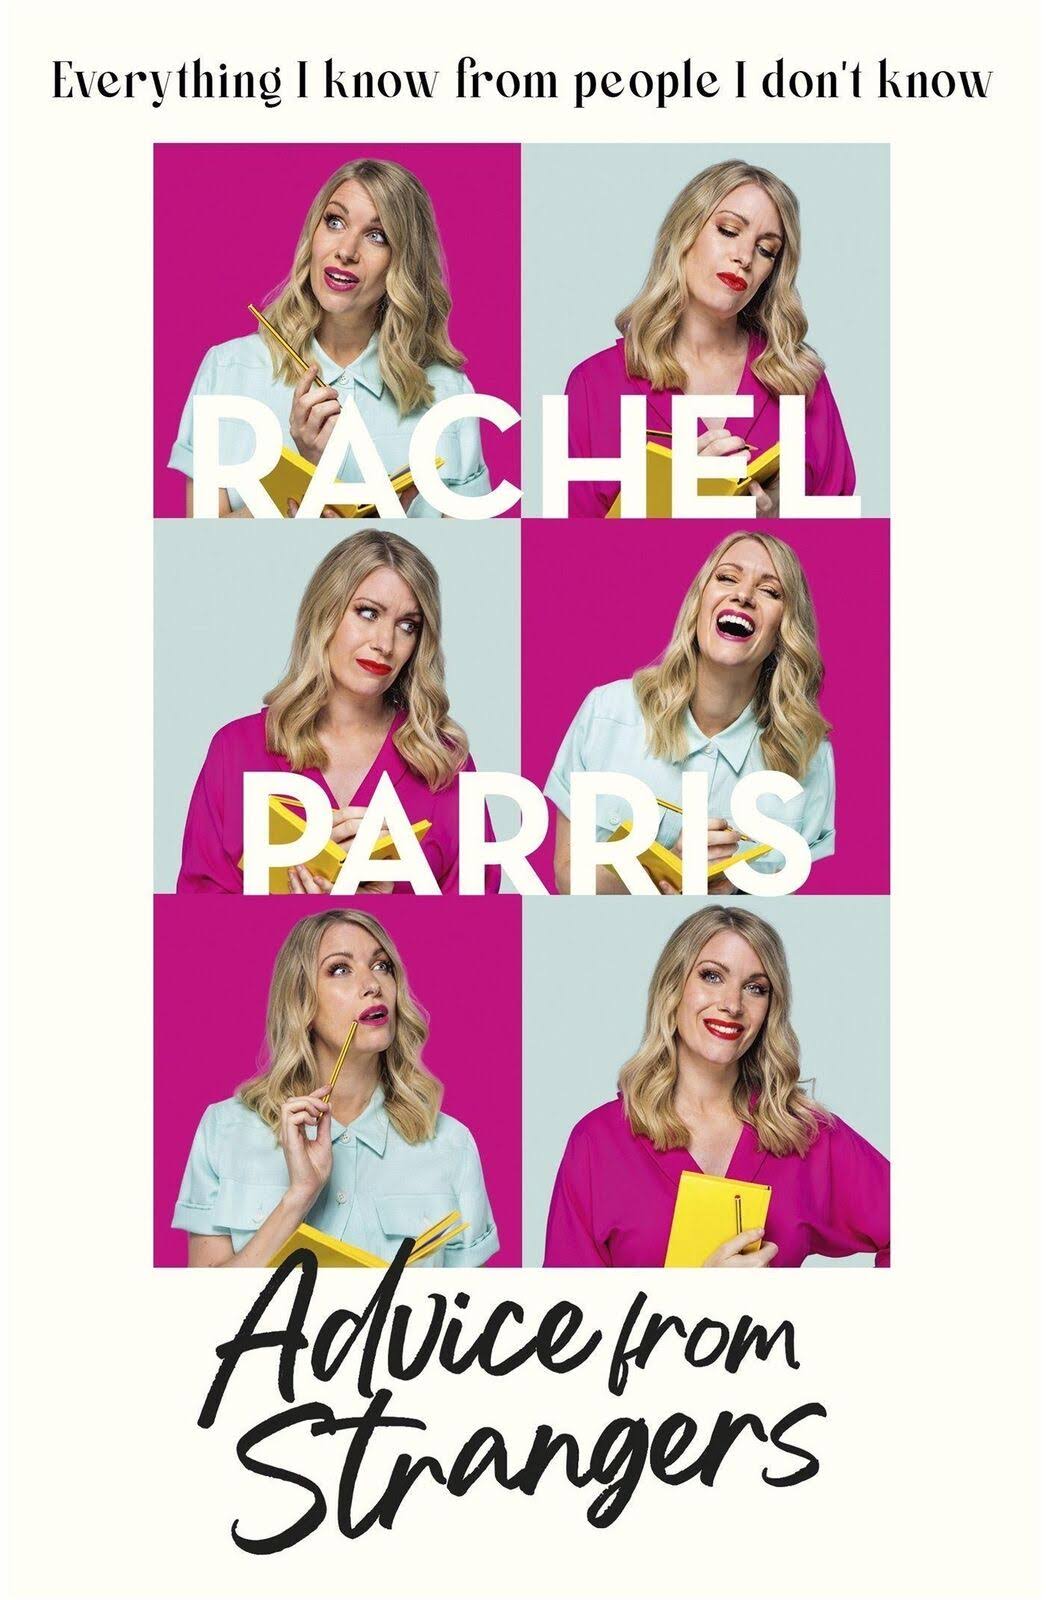 Advice from Strangers by Rachel Parris